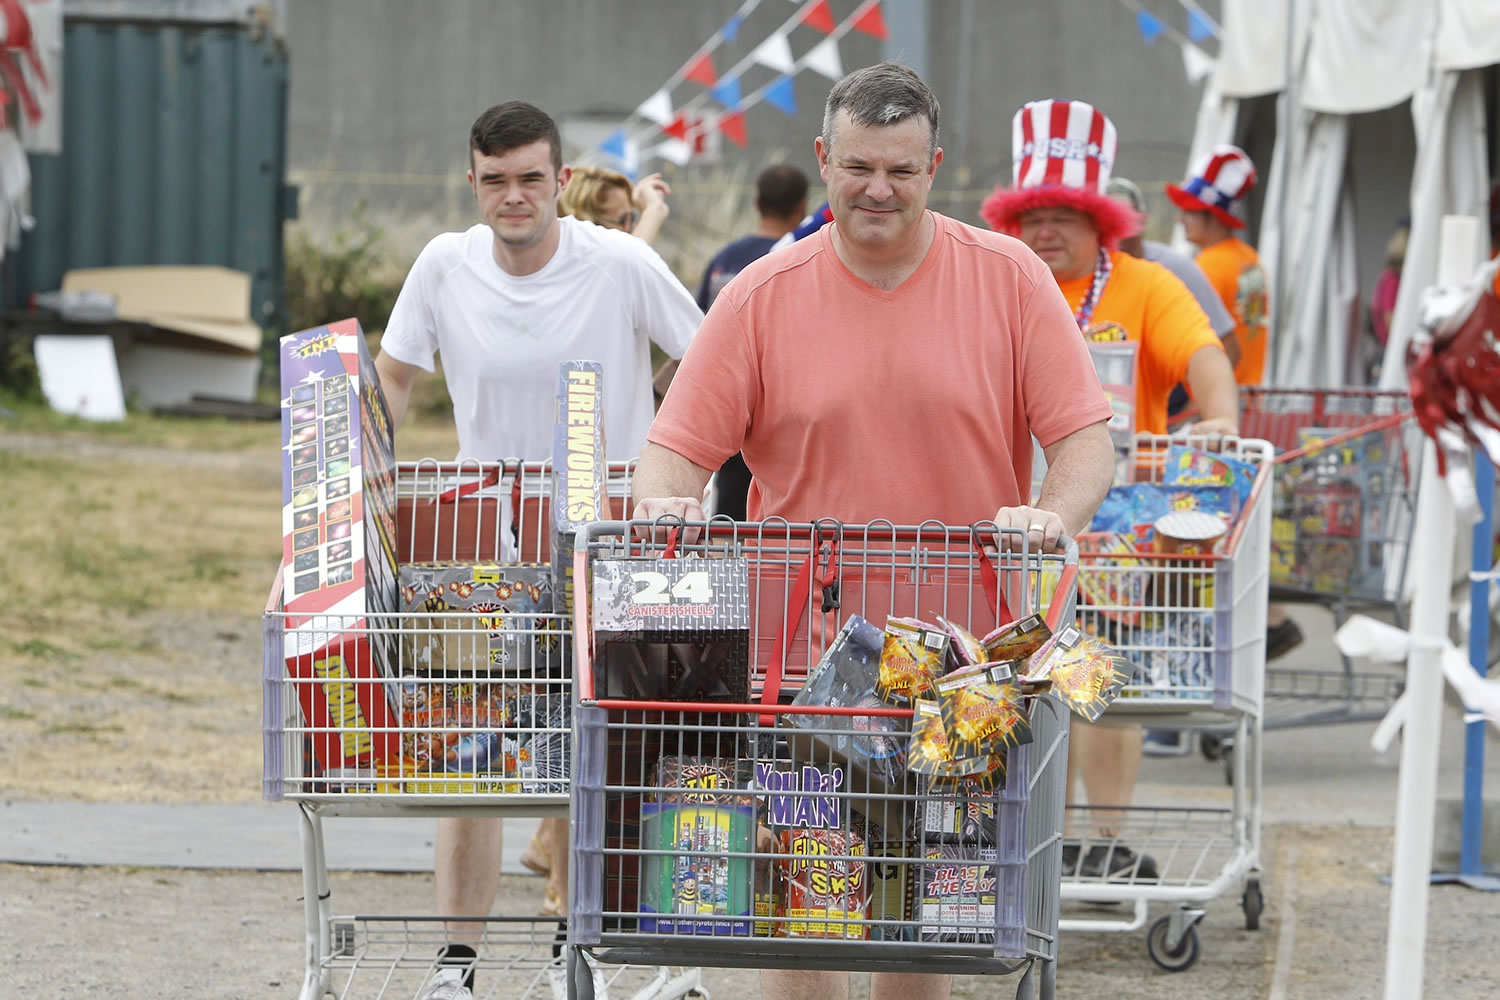 Eddie McGrath, from left, his father, Ed McGrath, and TNT Fireworks Warehouse's general manager, Beau Leach, push the McGraths' fireworks haul to their vehicle Sunday.